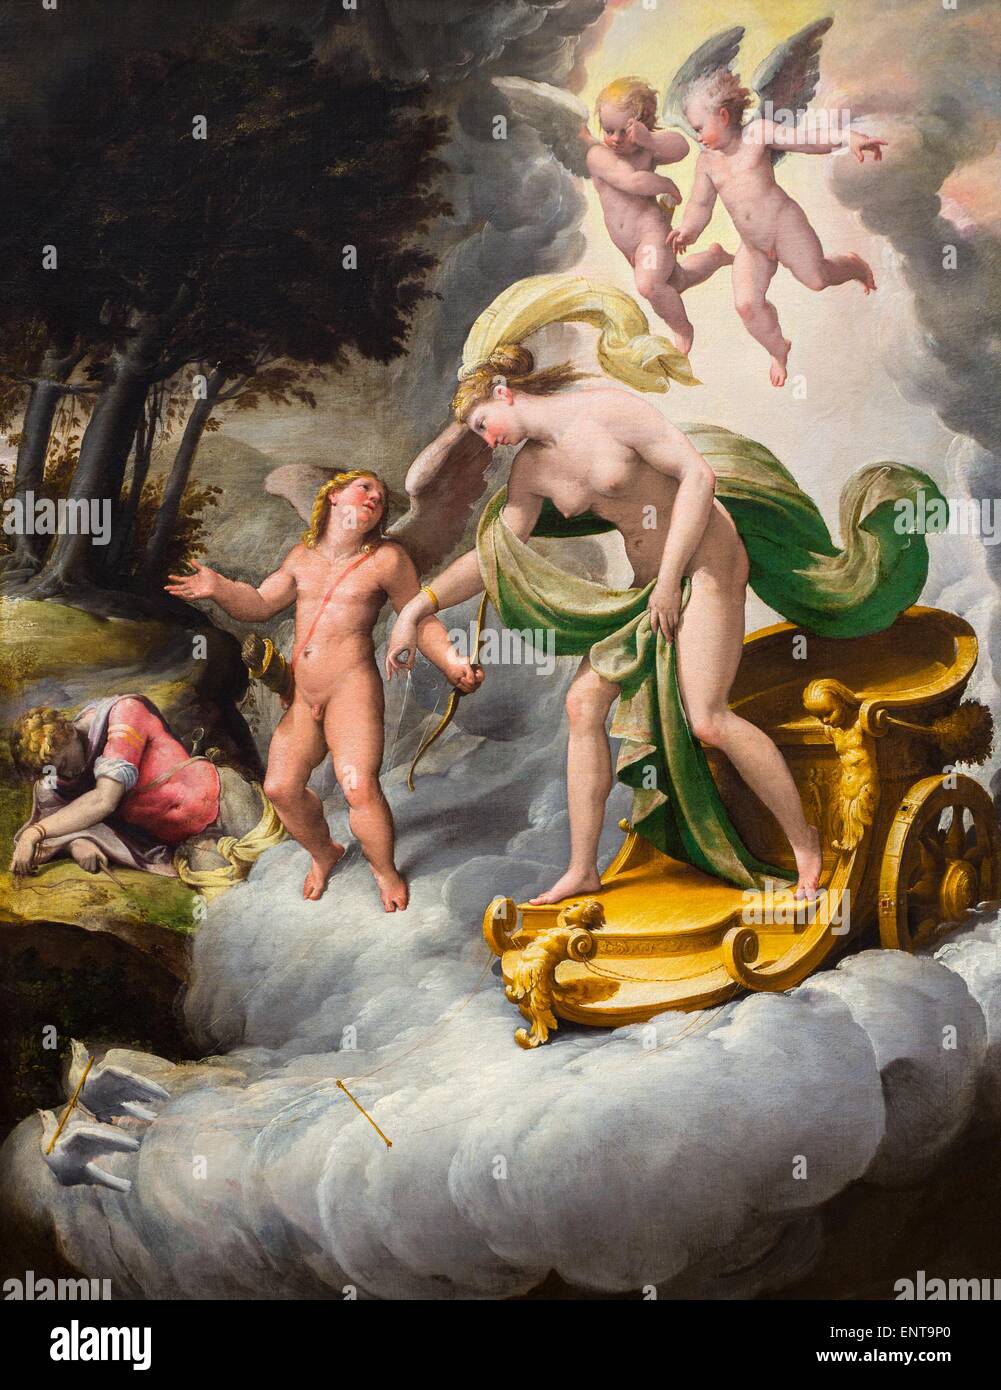 Venus conducted by Love alongside with dead Adonis, mortally wounded by a boar because of Diana anger (Metamorphoses by Ovid) 26/09/2013 - 16th century Collection Stock Photo